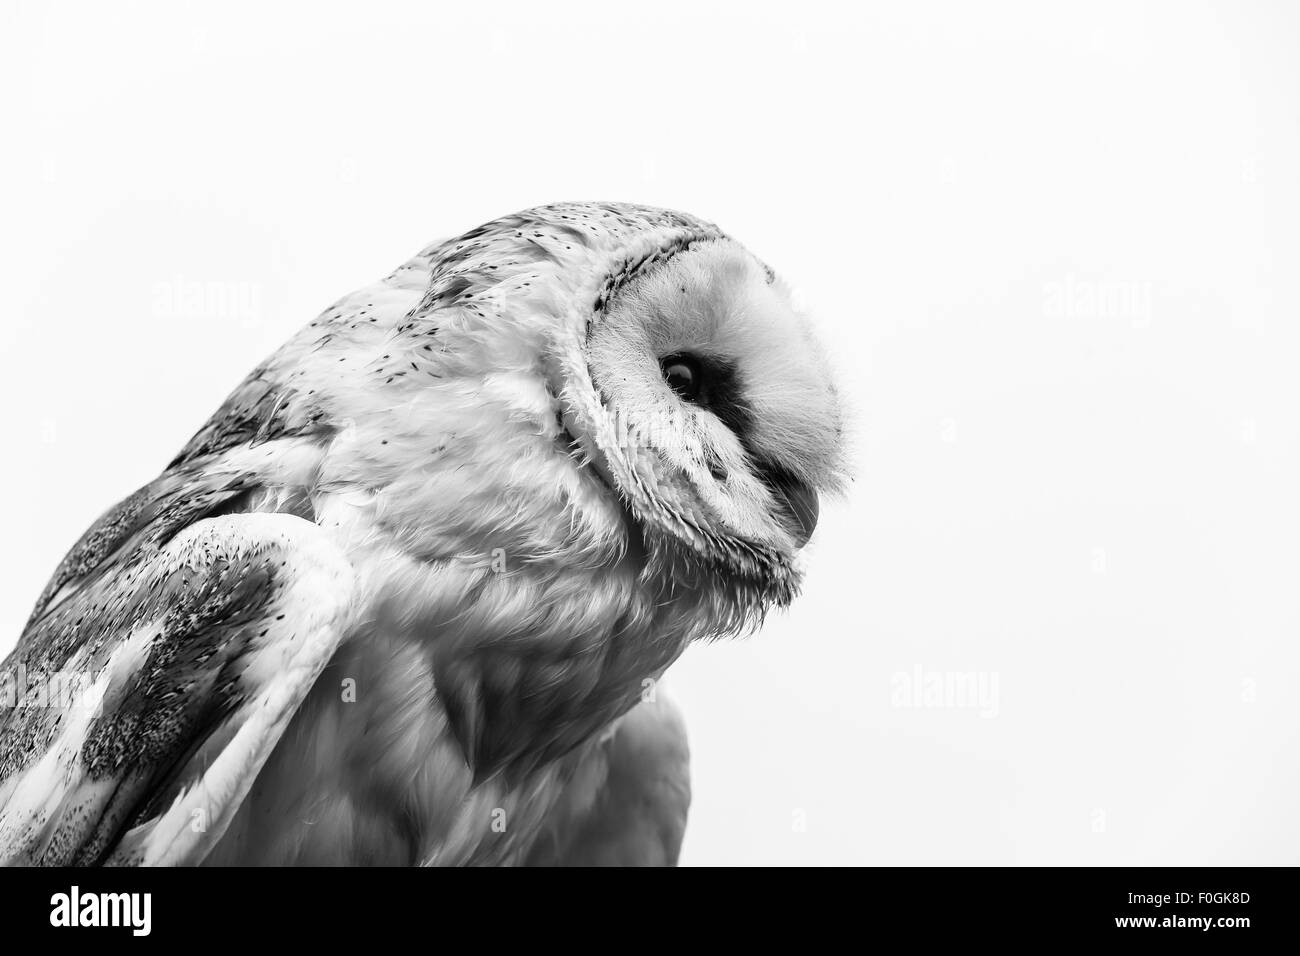 Head of a Barn Owl edited into a black and white image. Taken in North Yorkshire, England Stock Photo